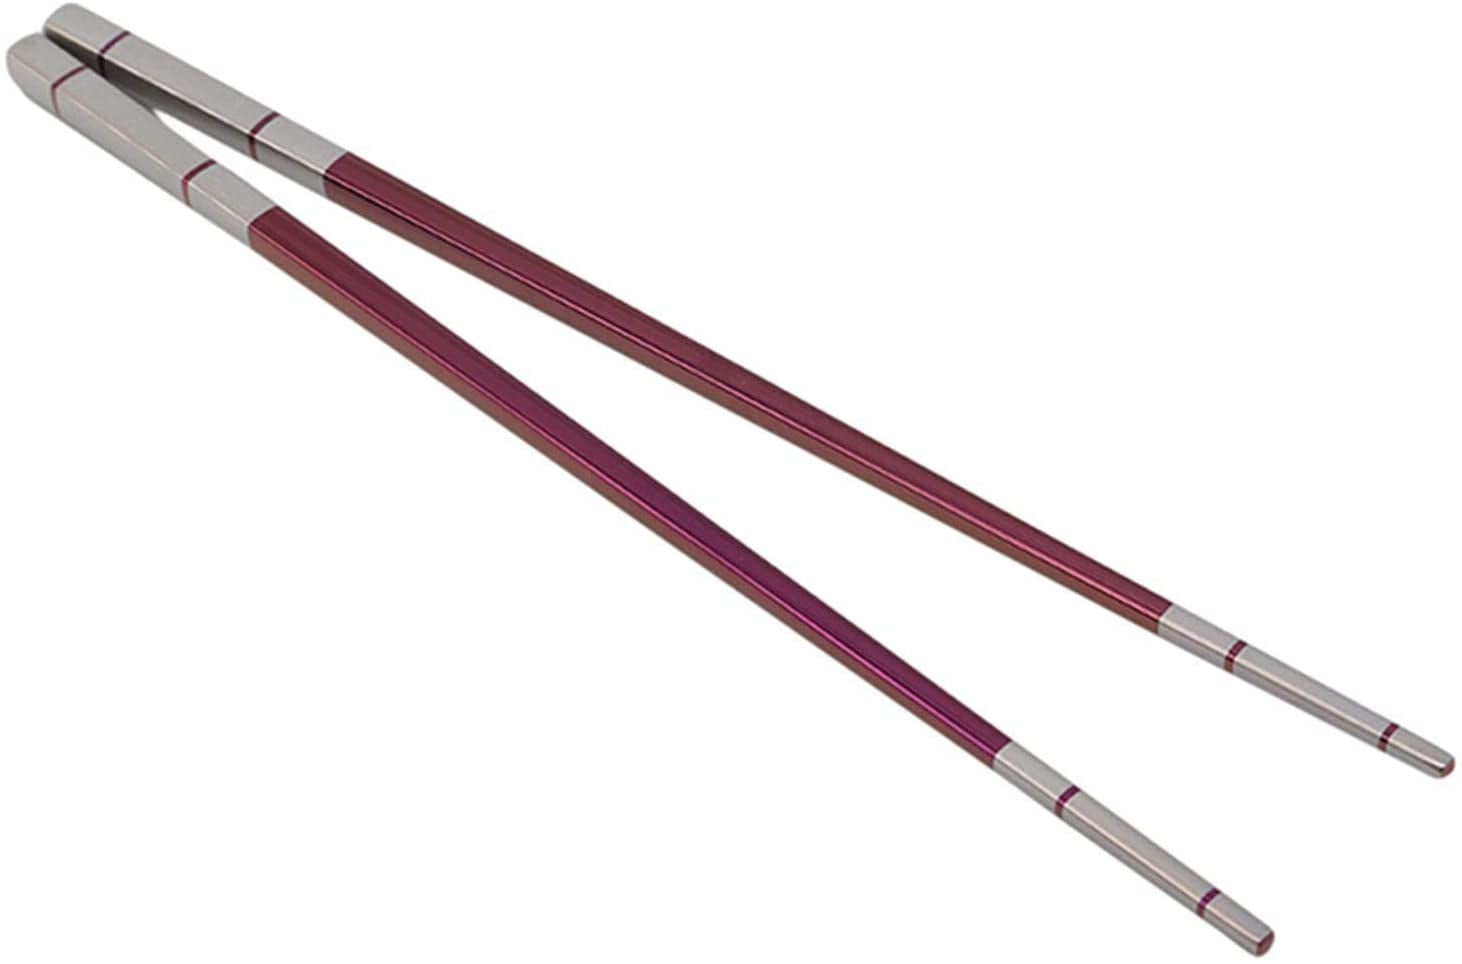 Xthel 2 Pairs Stainless Steel Chopsticks Reusable With Aluminium Case Marin Blue & Violet 